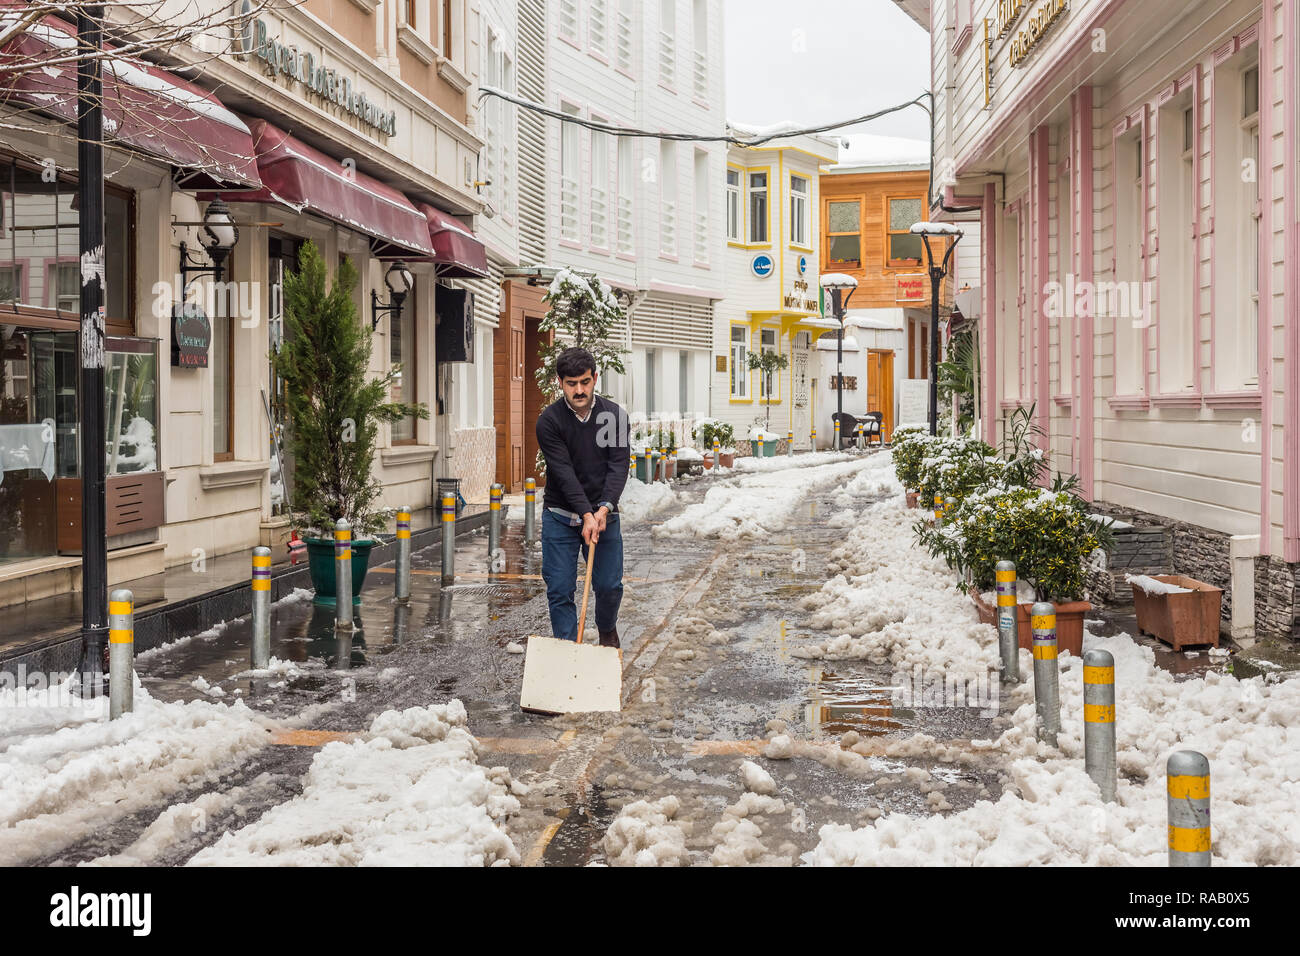 Istanbul, Turkey, February 19, 2015: Turkish man clearing the sonow outside a restaurant in Eyup District. Stock Photo